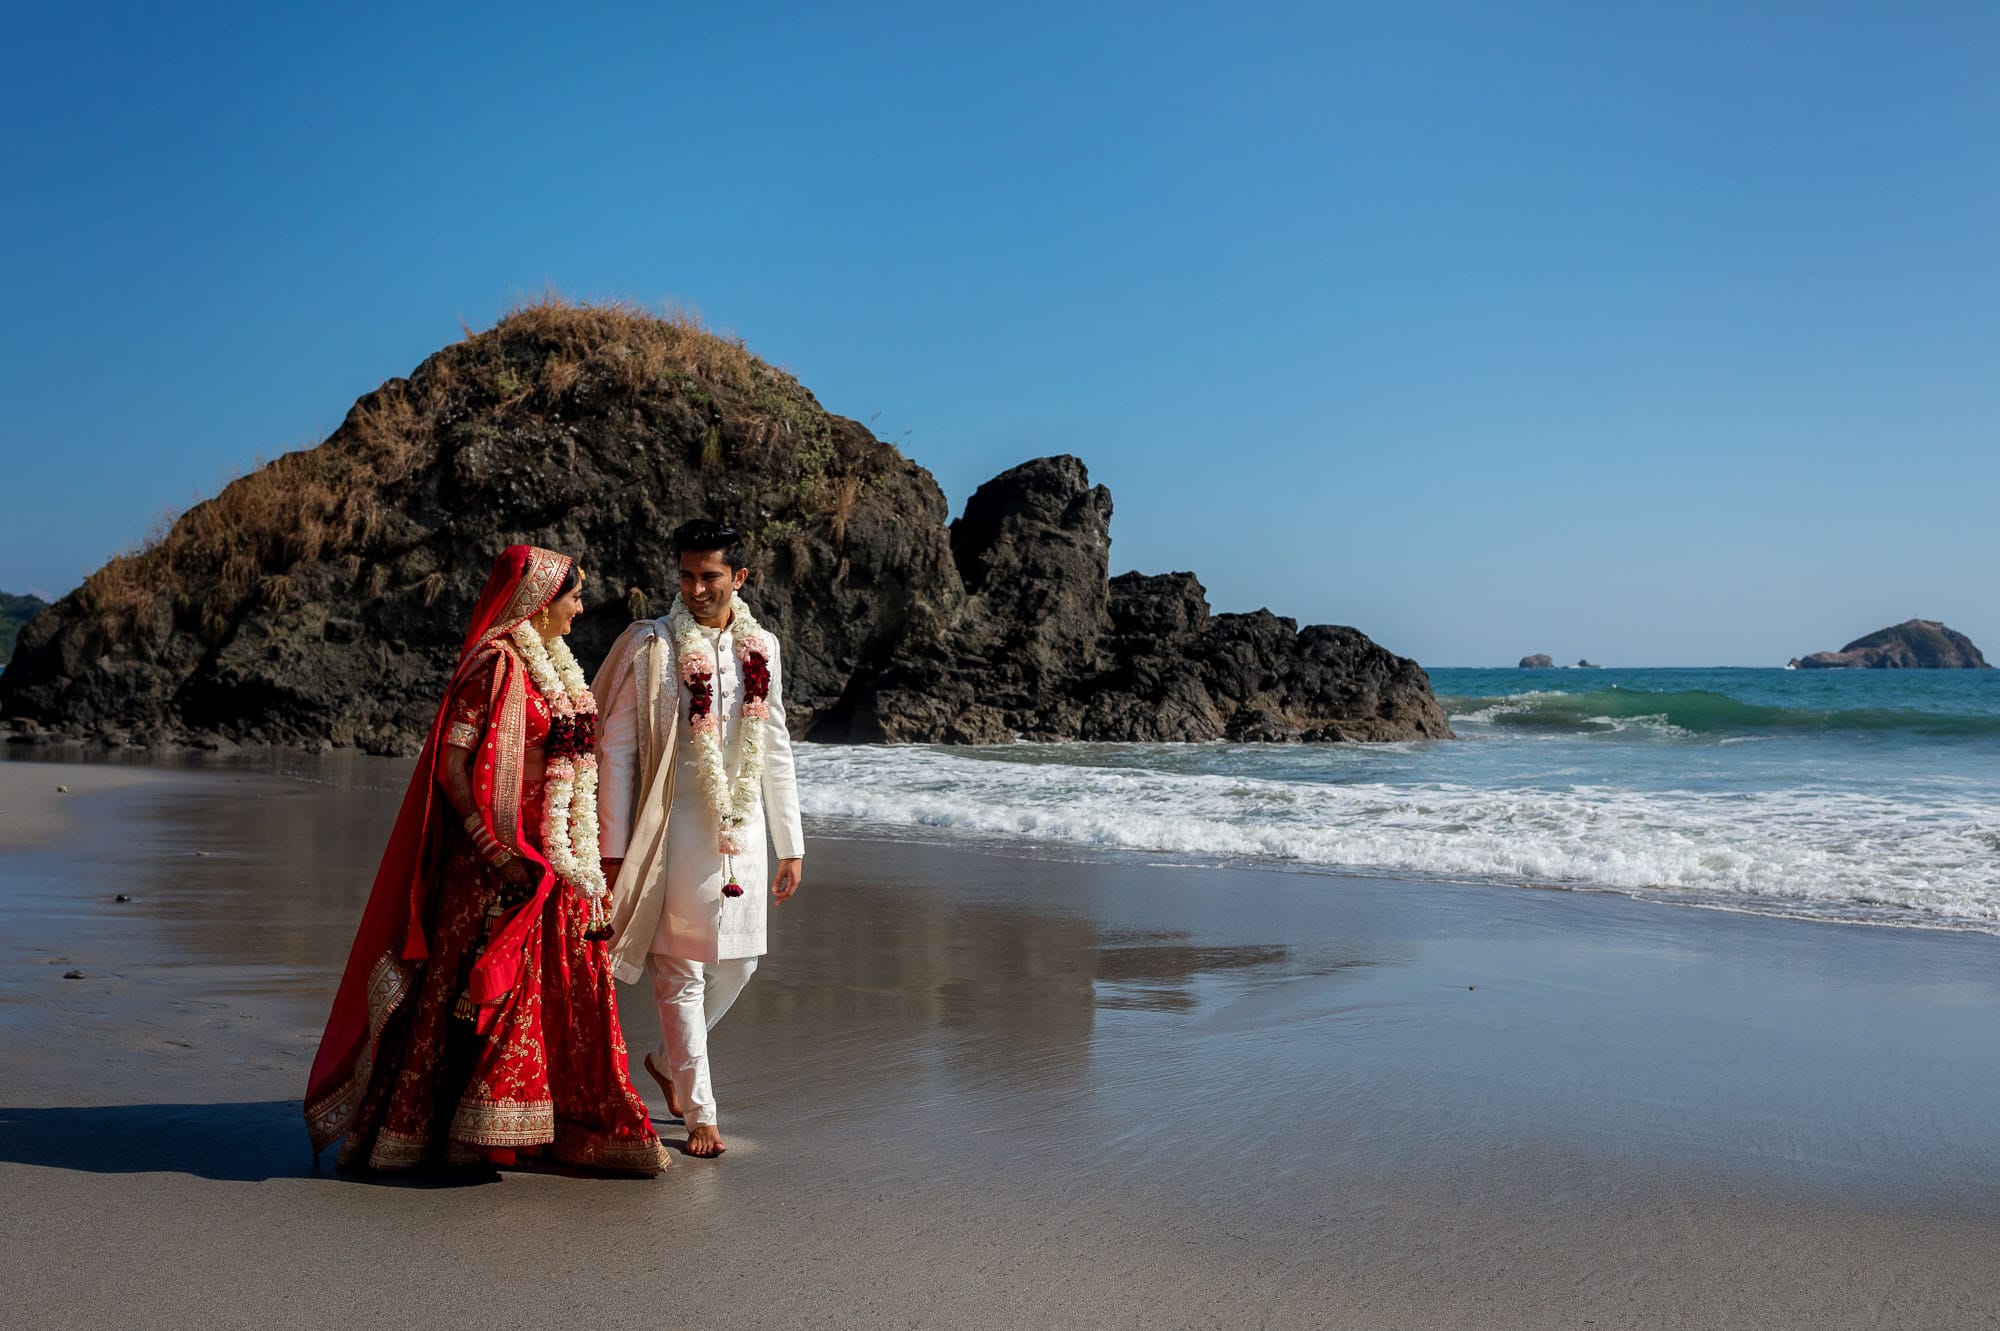 The bride and groom on the beach in traditional Hindu garb